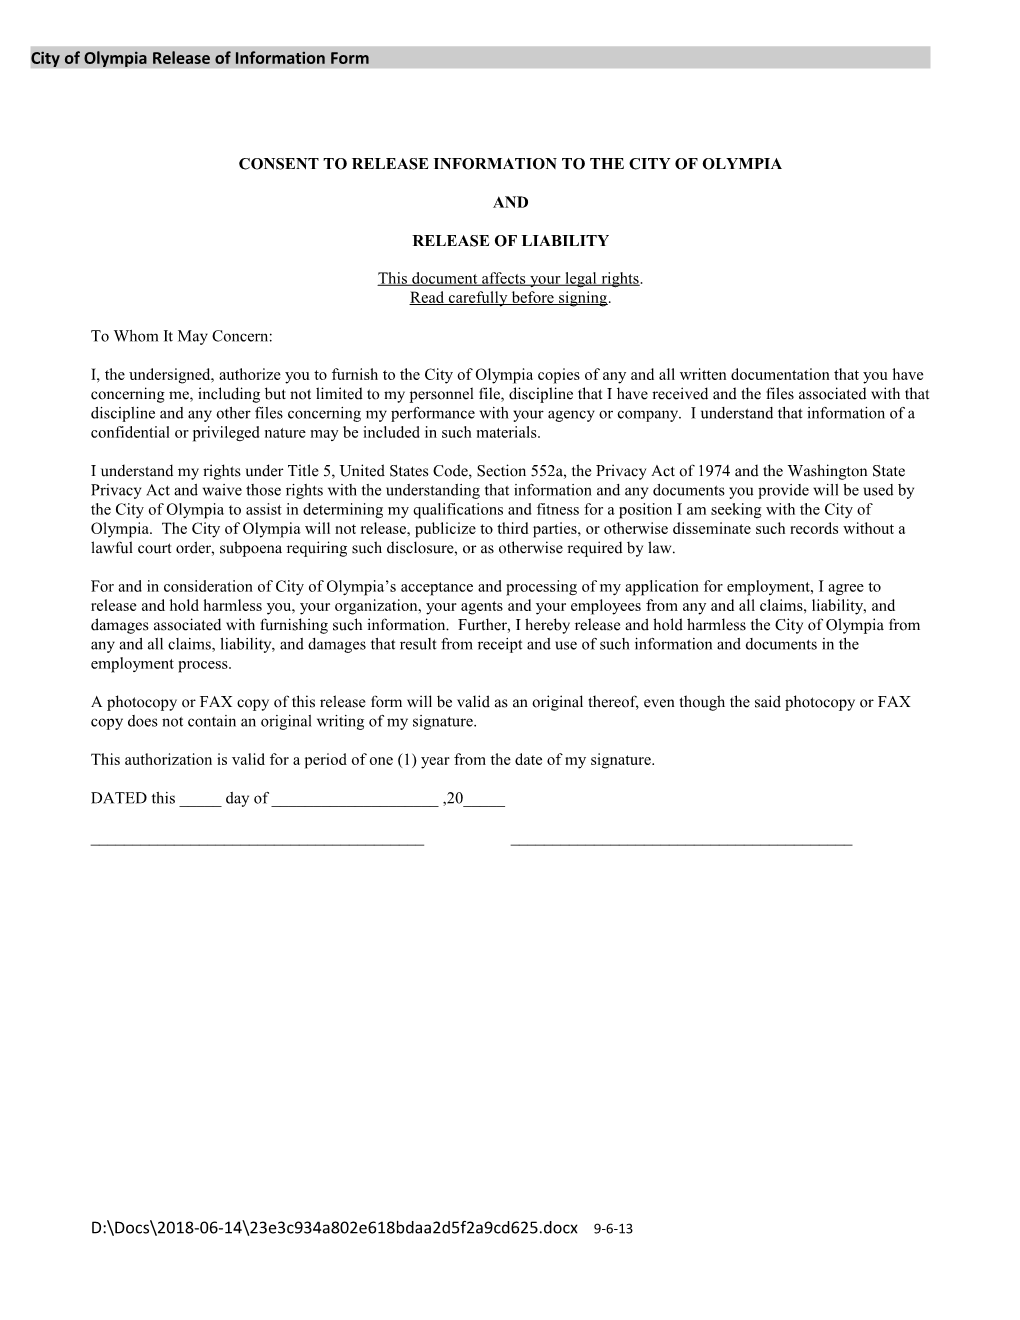 City of Olympia Release of Information Form